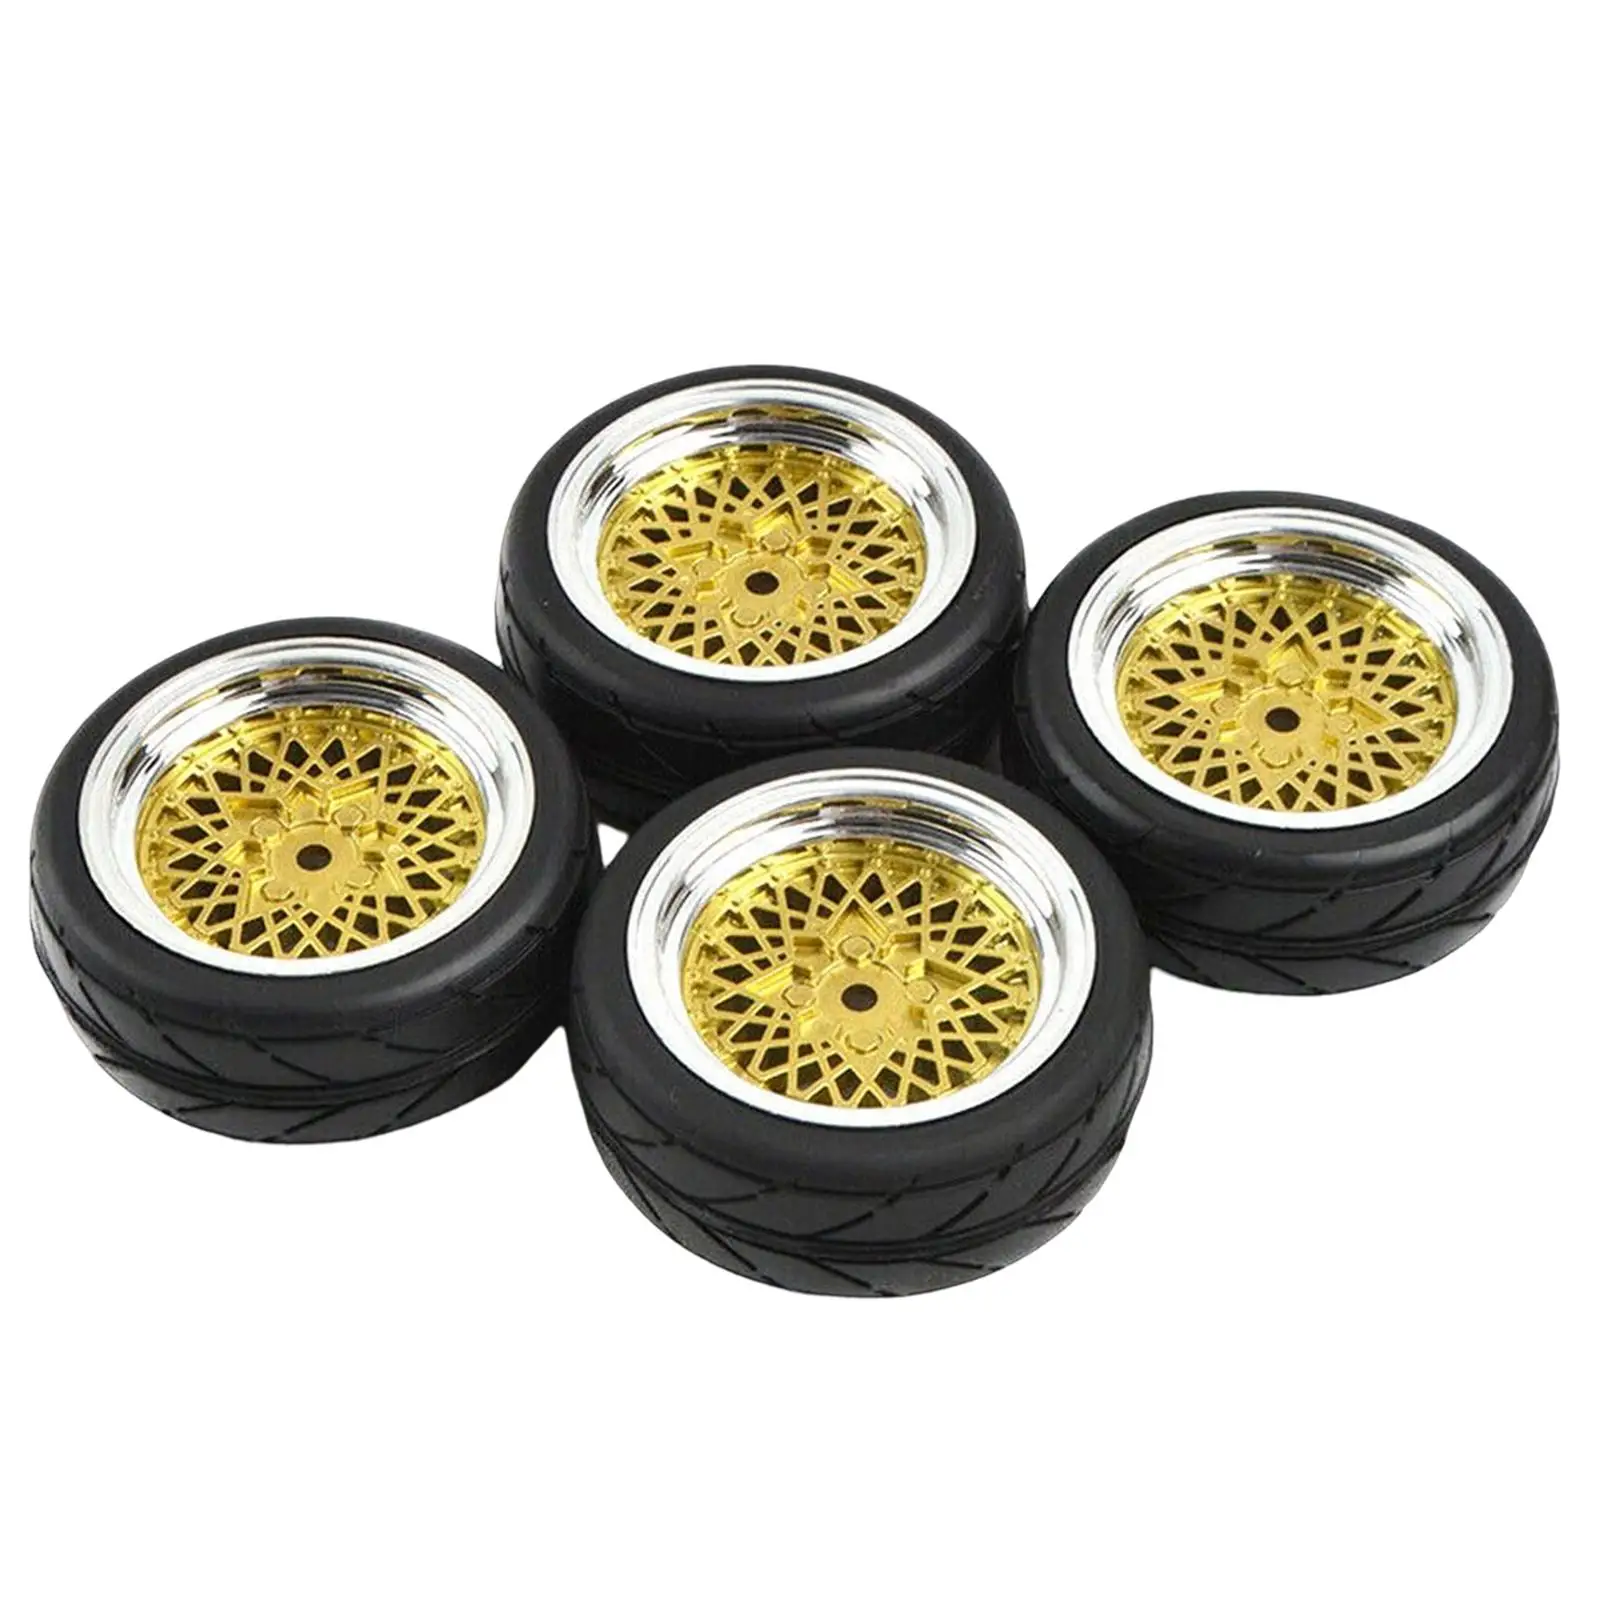 4 Pieces 1/10 Rubber Wheel Rim and Tires Spare for HSP HPI RC Car Crawler Vehicles